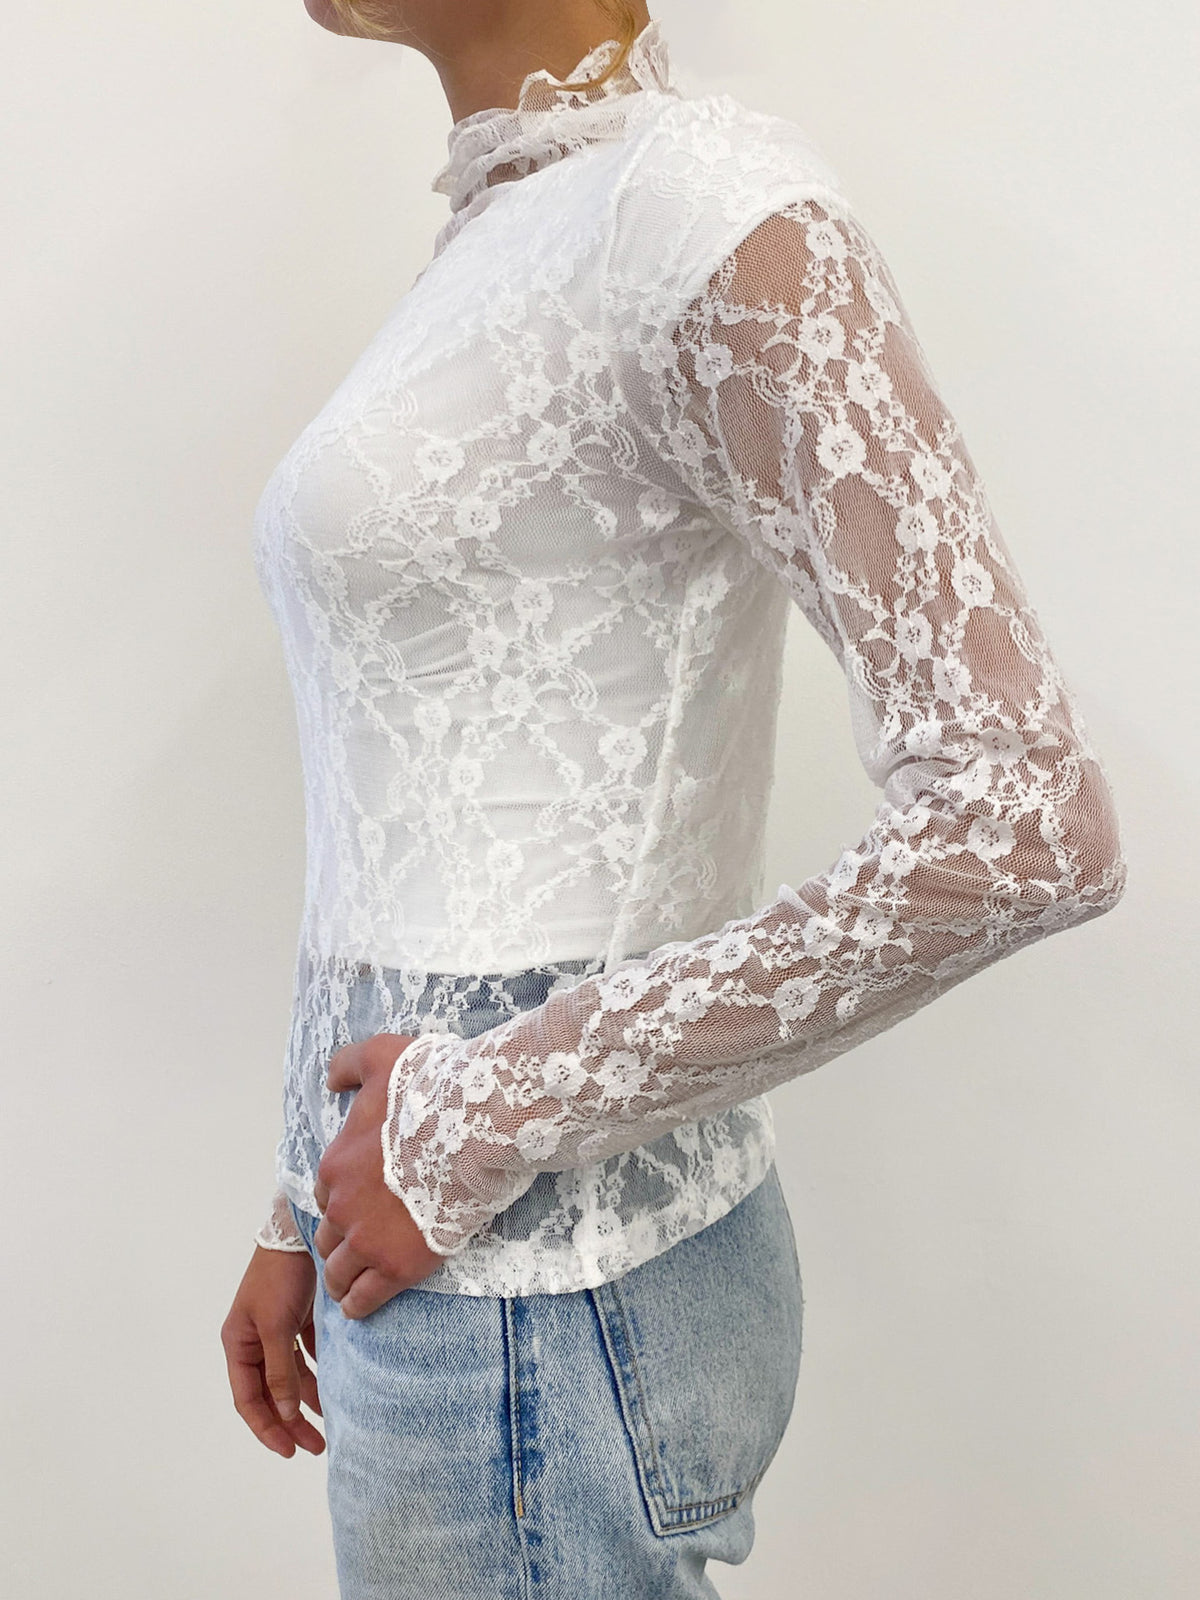 Zutter White Floral Lace Top